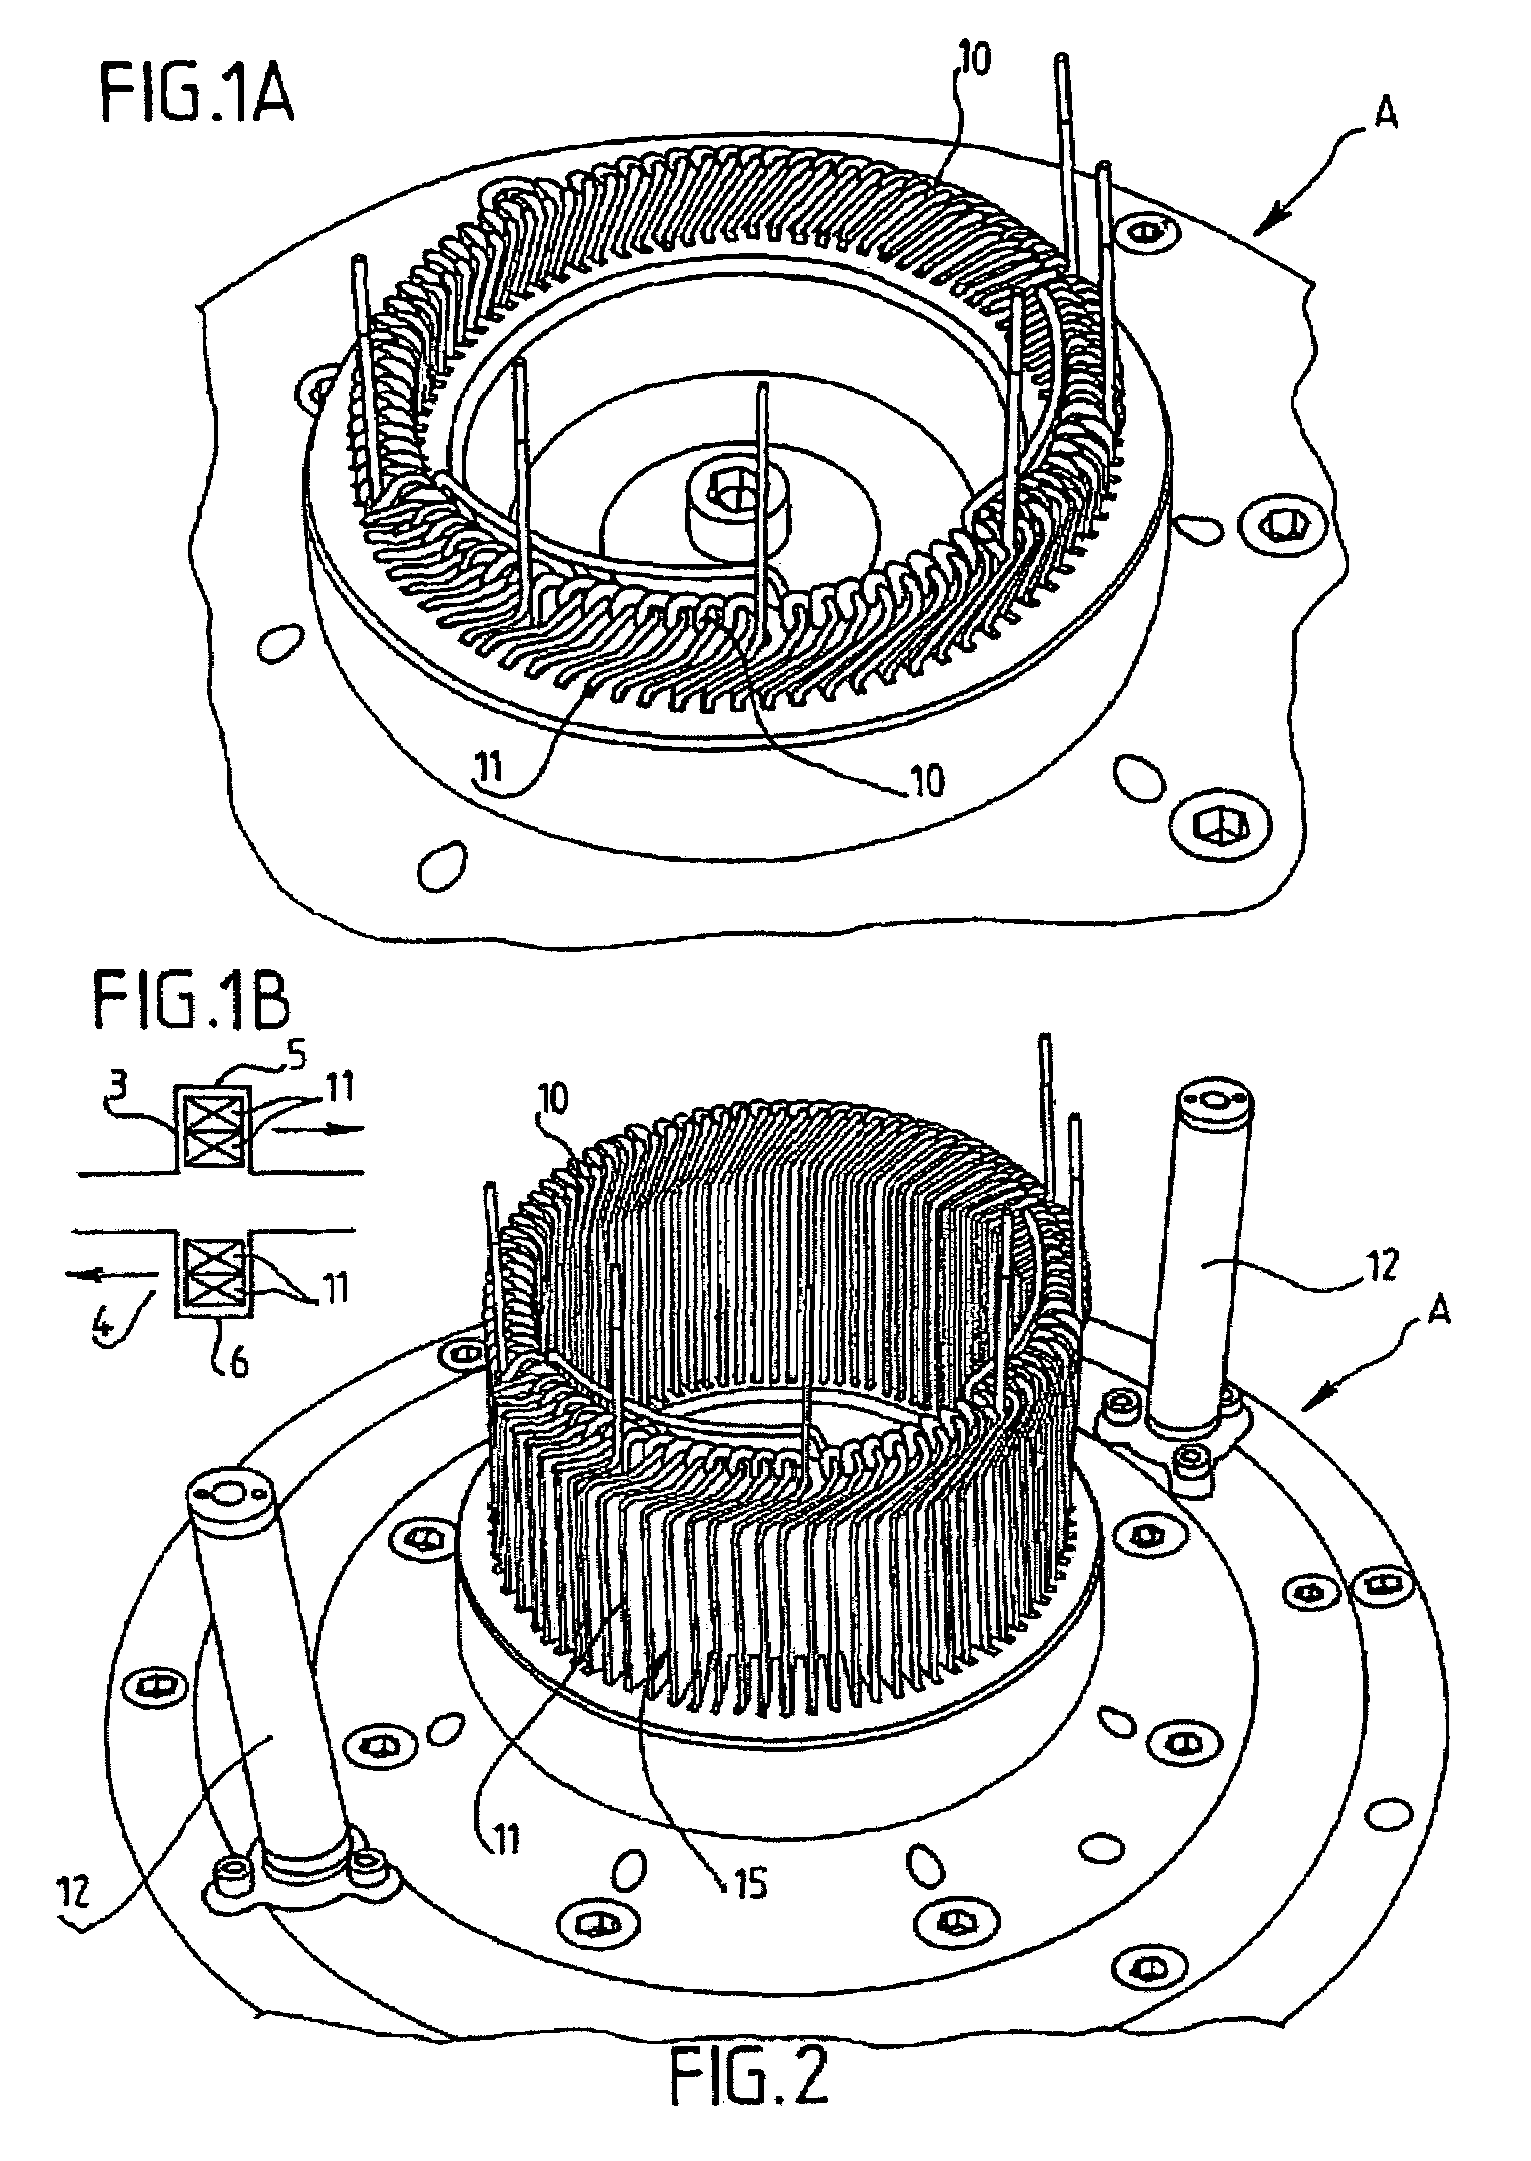 Device for gripping and transferring a ring of electrical conductors which is used to produce a winding and a winding-production system employing one such device